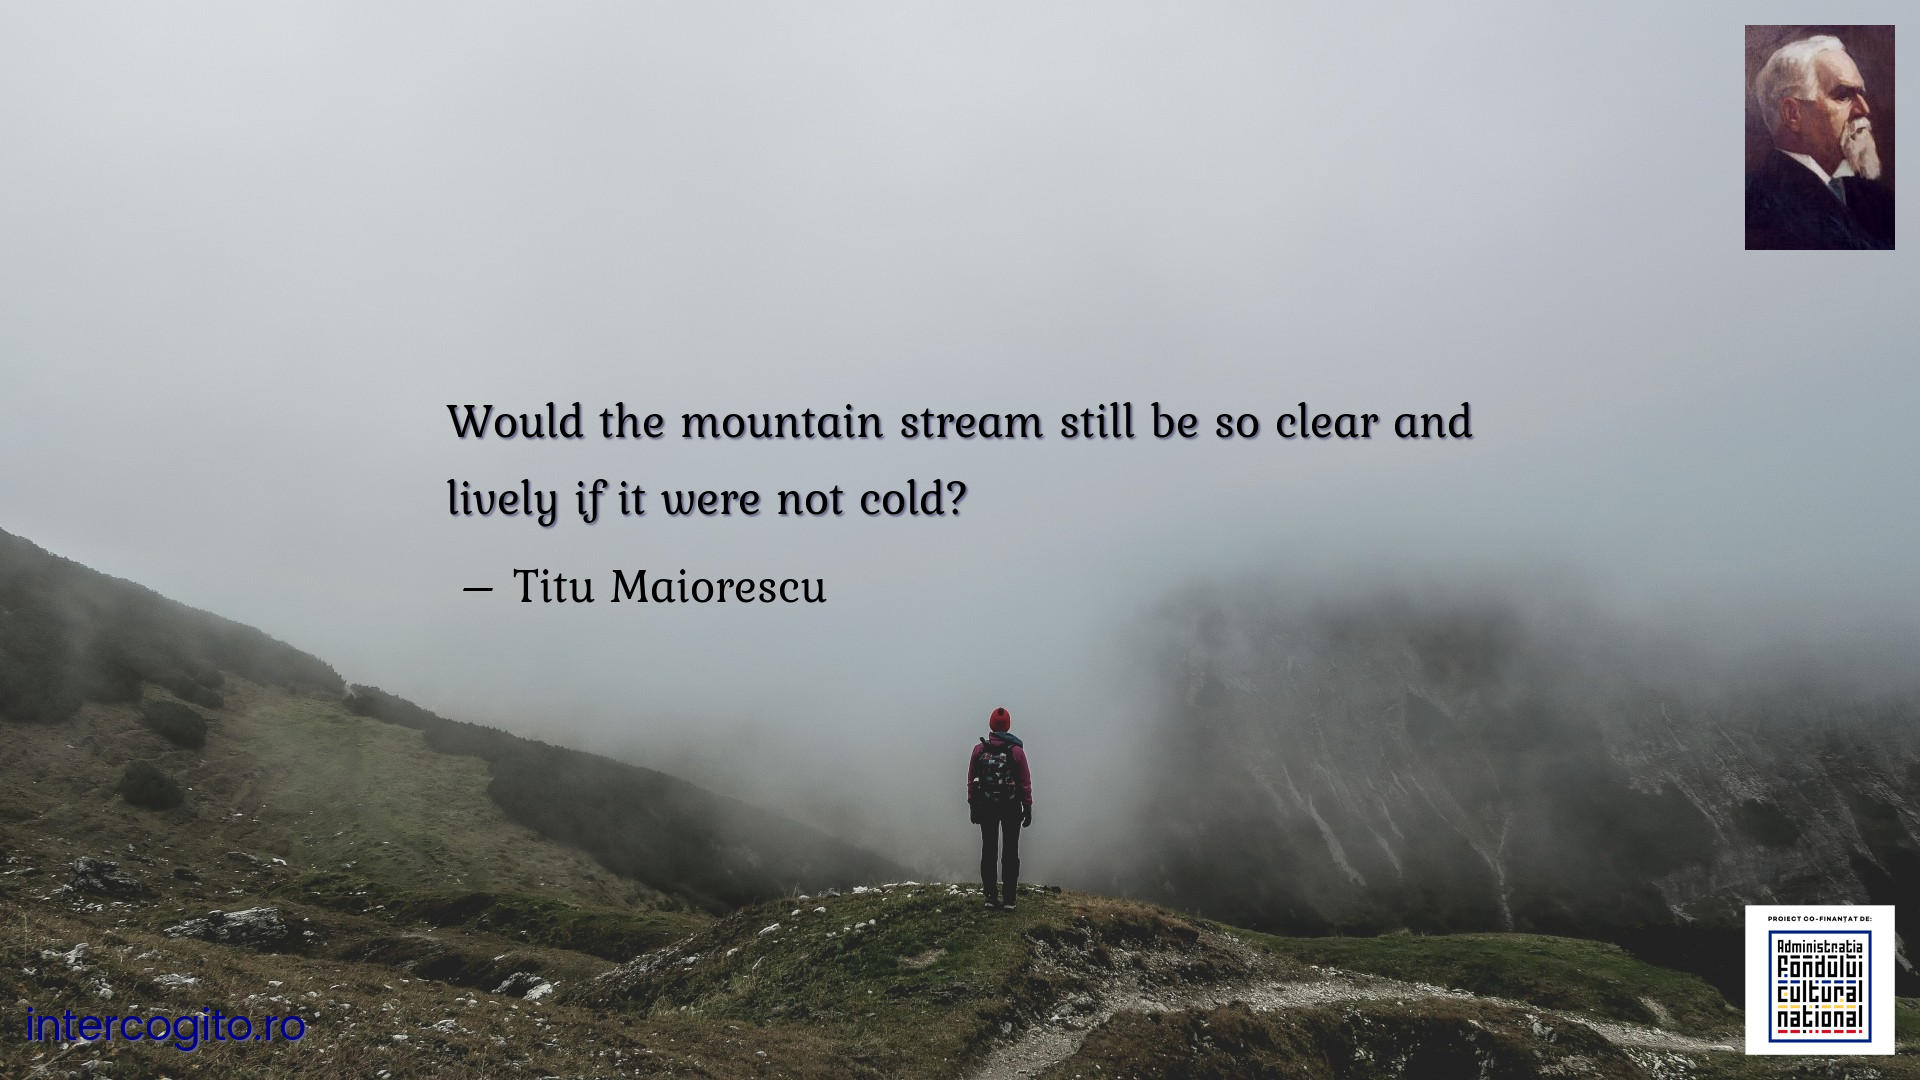 Would the mountain stream still be so clear and lively if it were not cold?